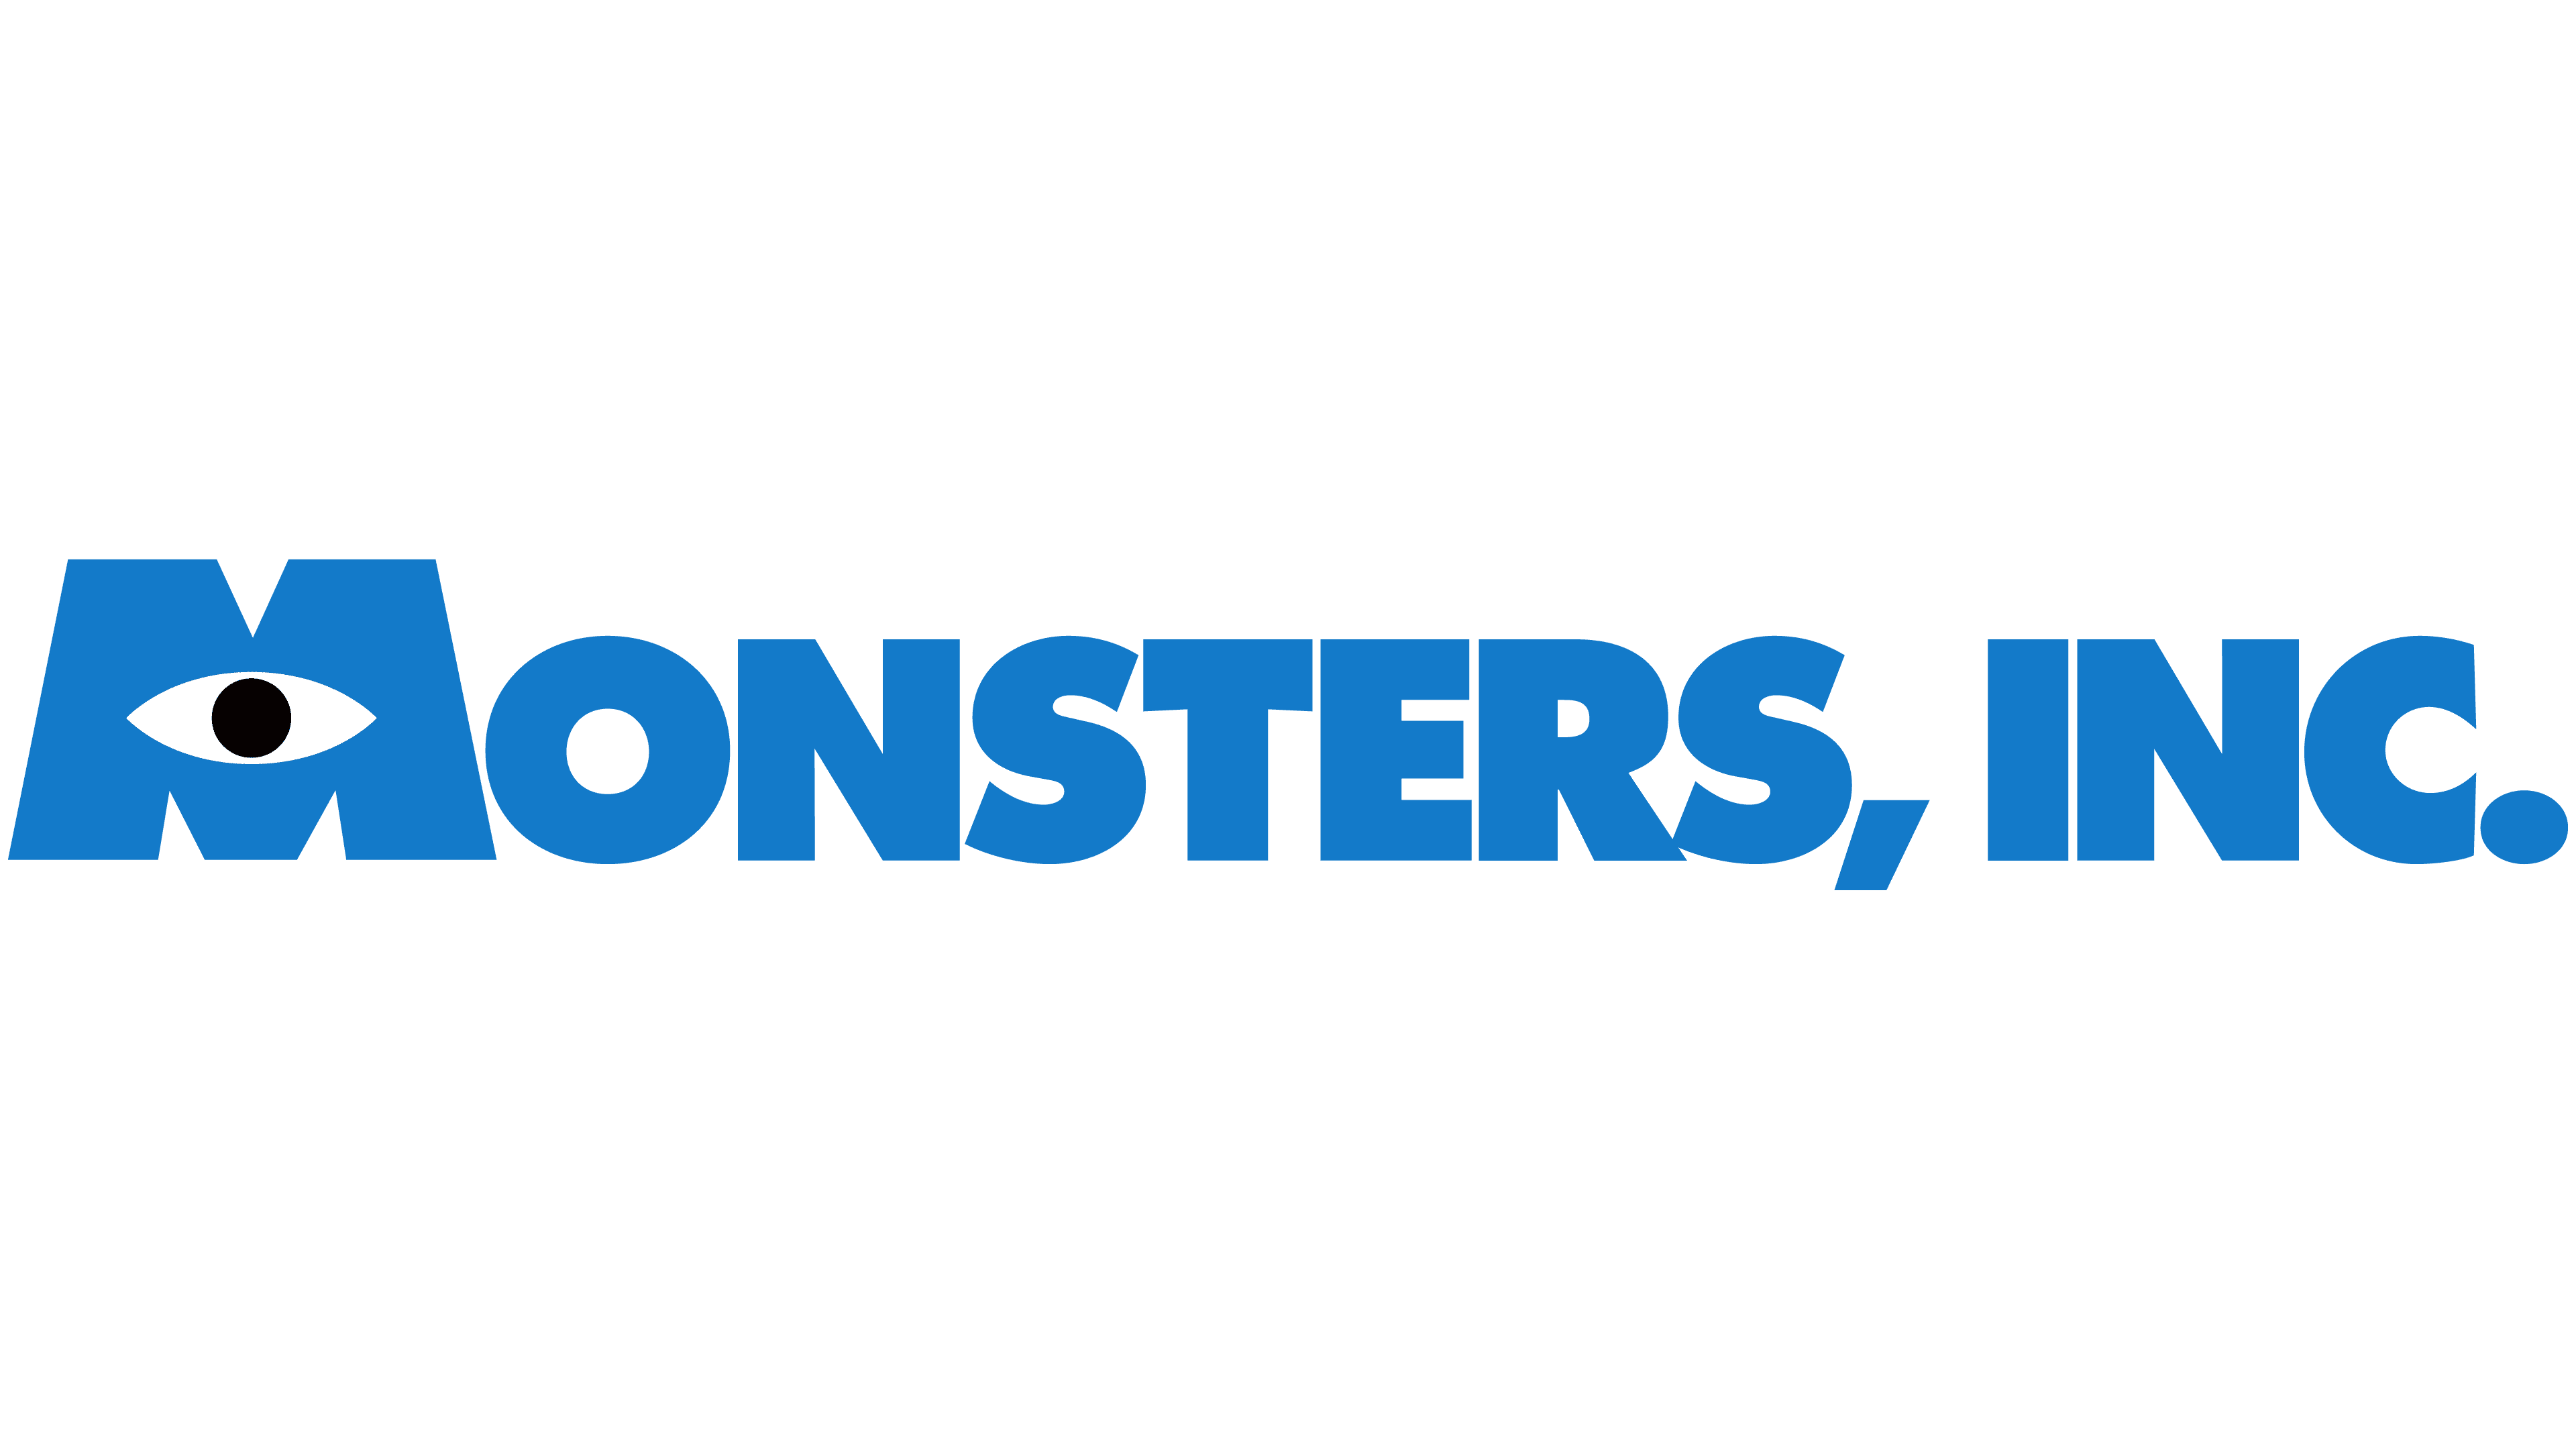 monsters university characters png